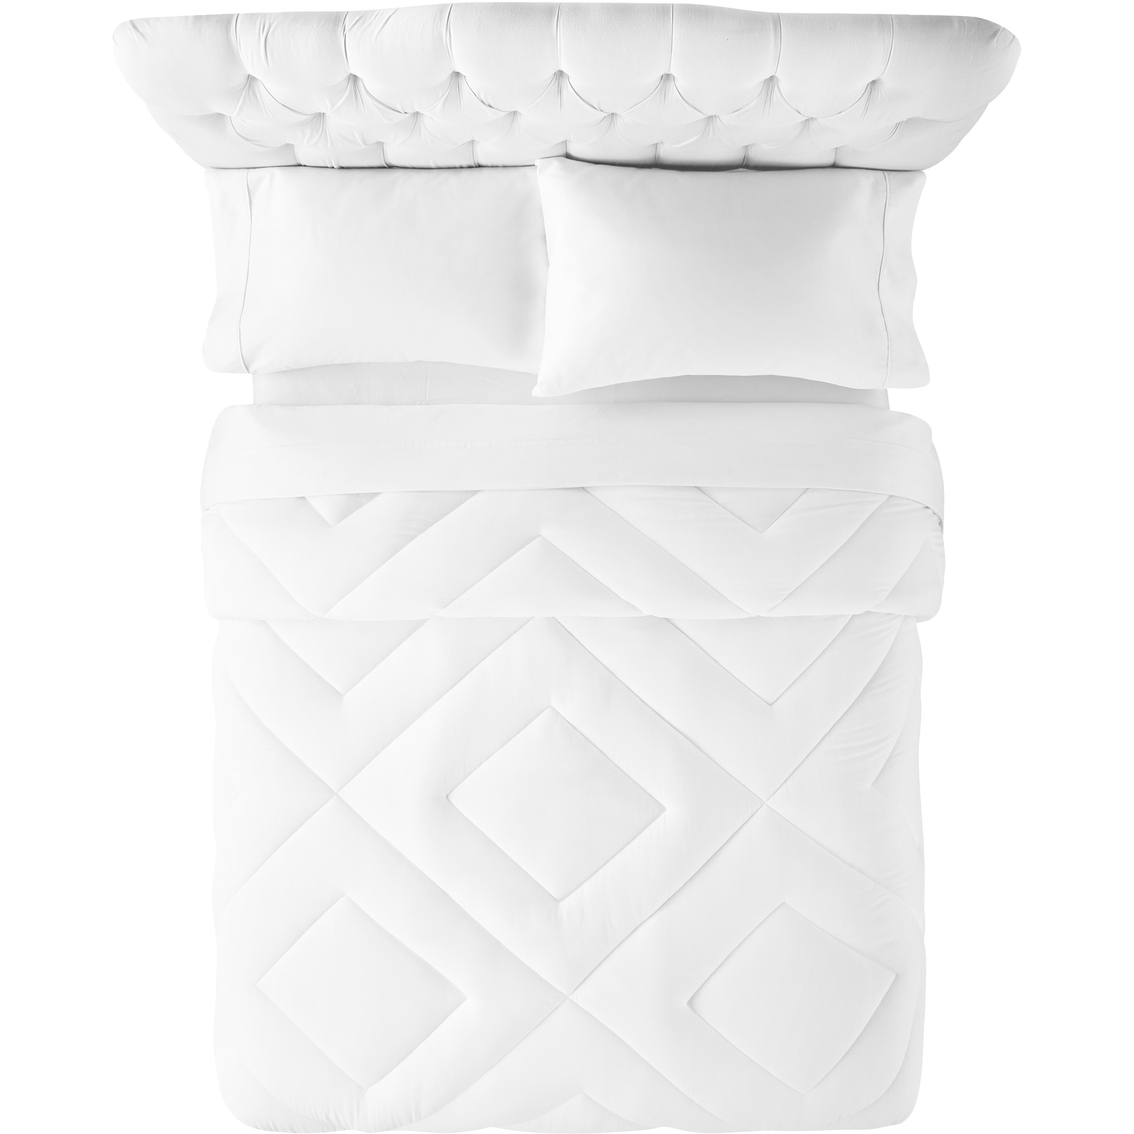 Tommy Bahama Relaxed Comfort Butter Soft Down Alternative Comforter - Image 2 of 5